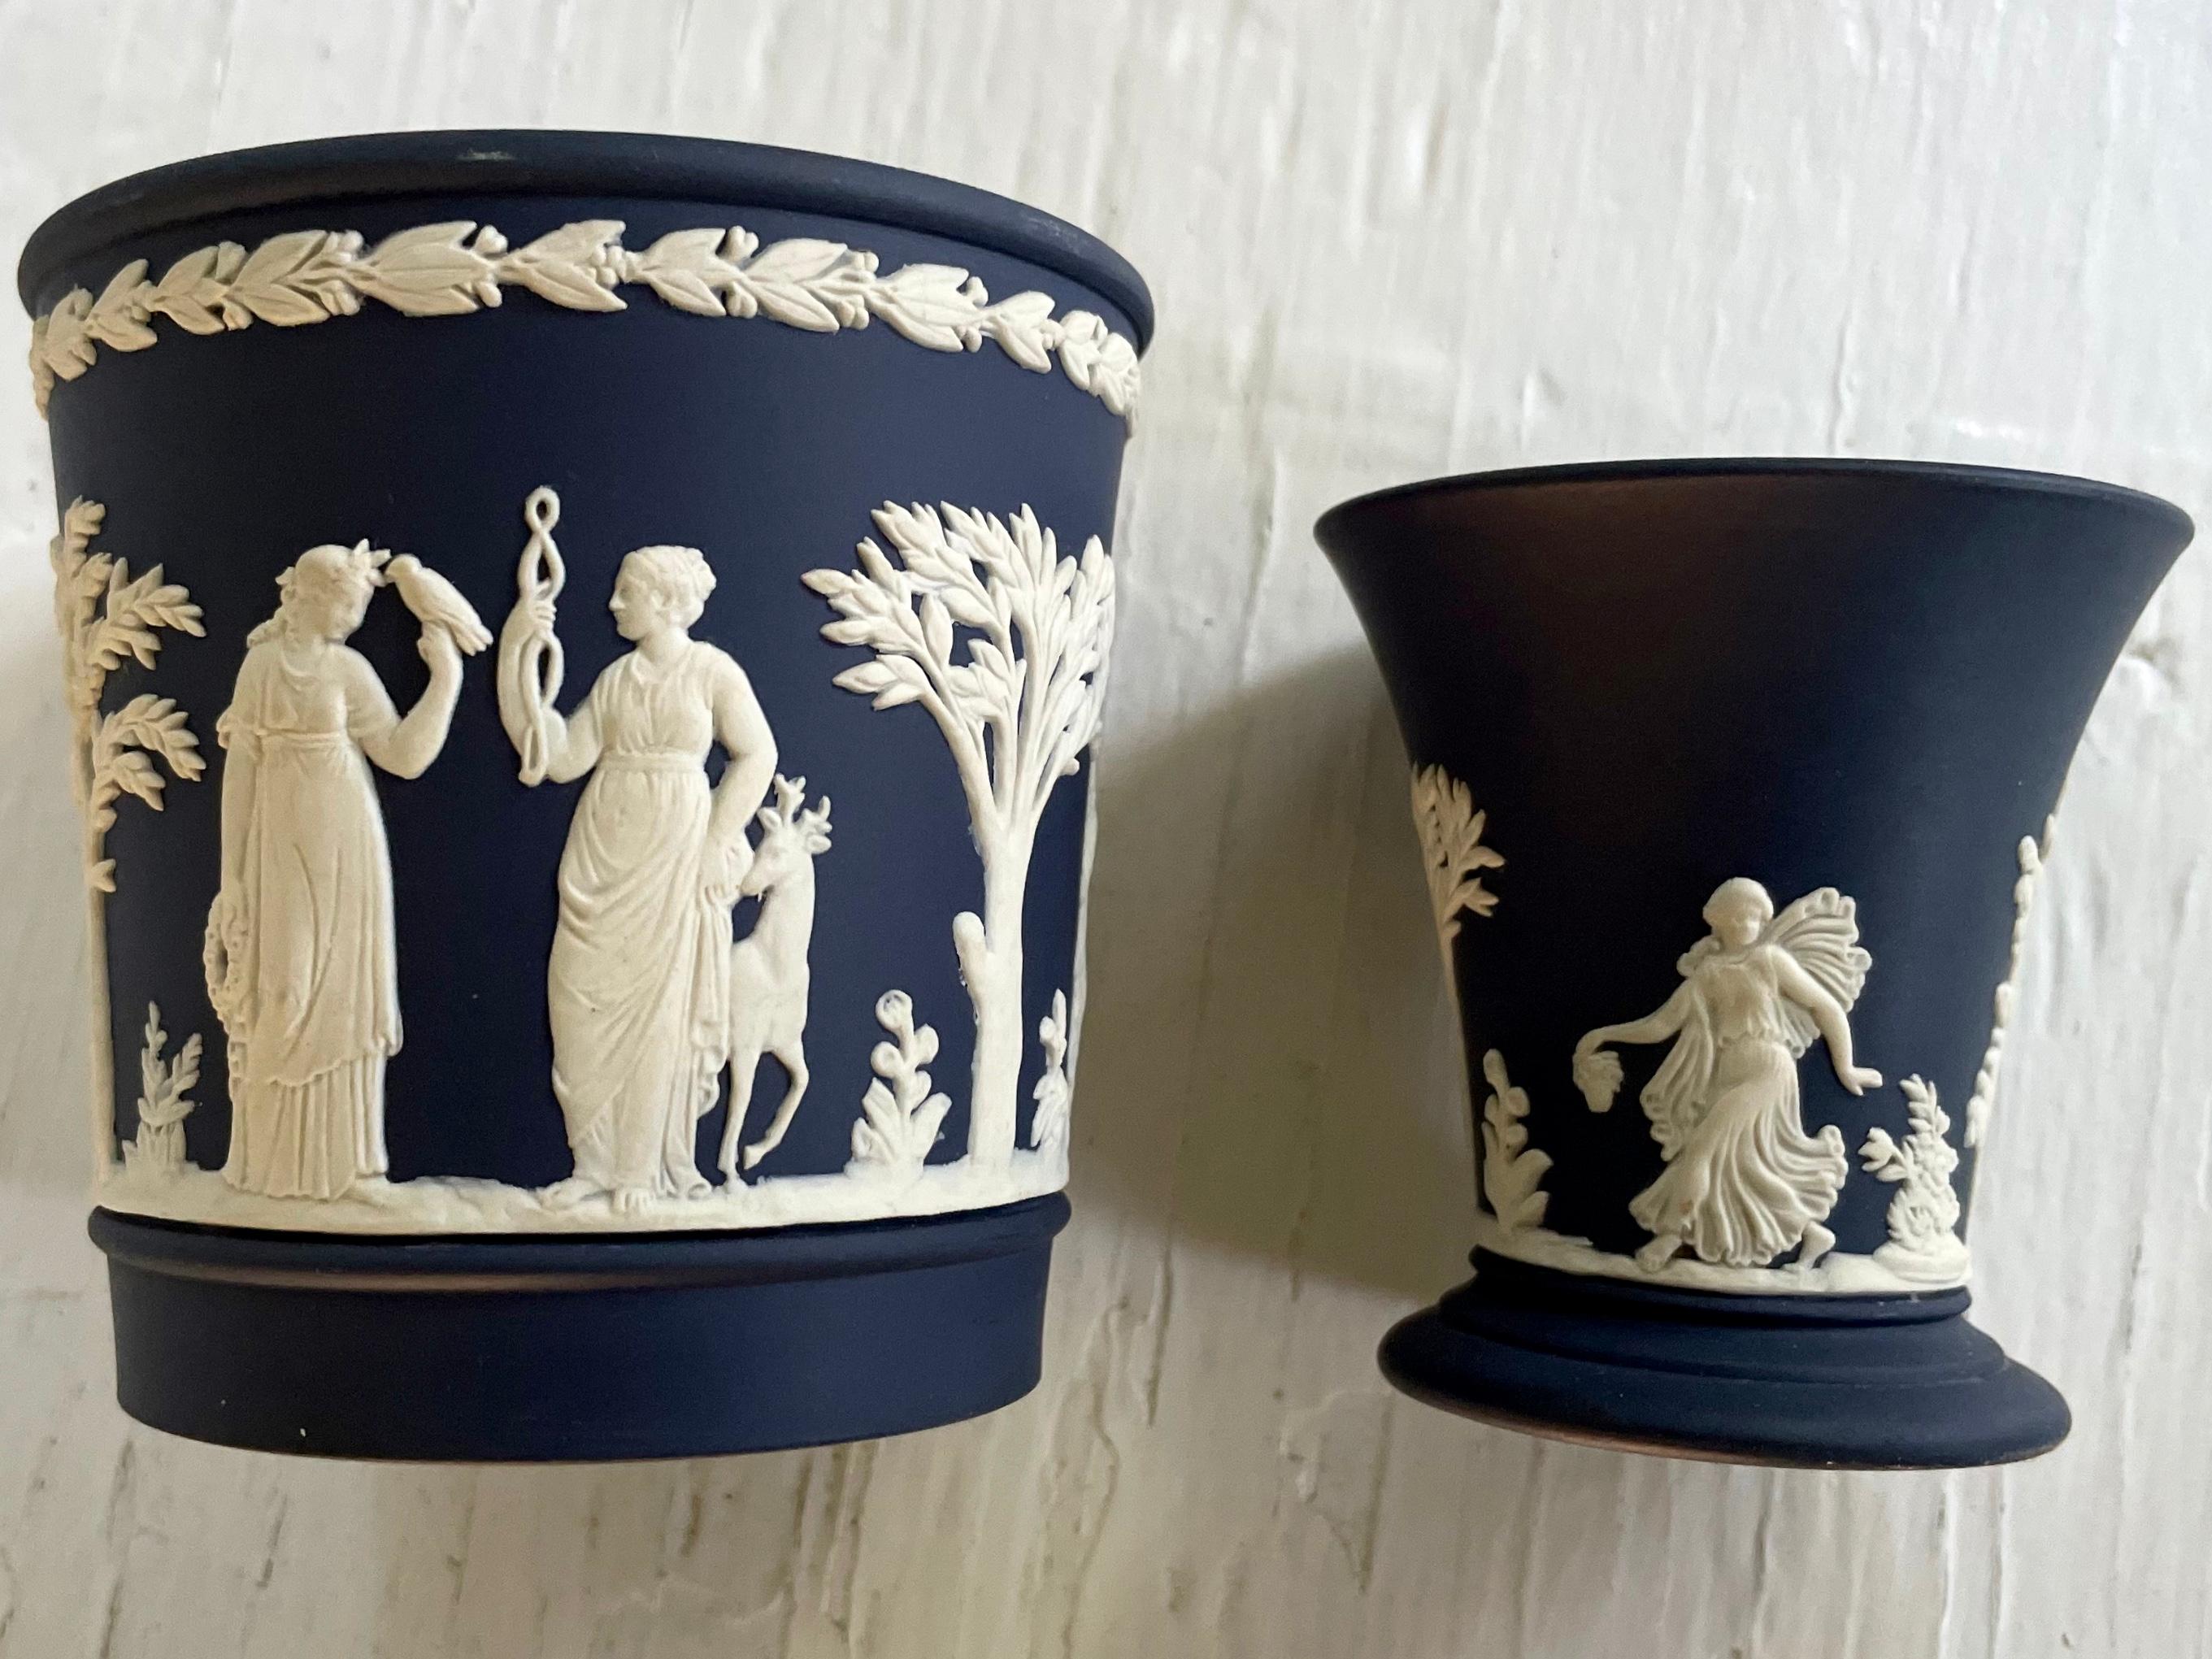 Pair Wedgwood blue and white Jasperware desk accessories. Beautiful blue grey bisque beaker/bud-vase with cream-ivory neoclassical bas relief, perfect for pens and paperclips on an elegant desk. Impressed marks for Wedgwood. England, Mid-20th